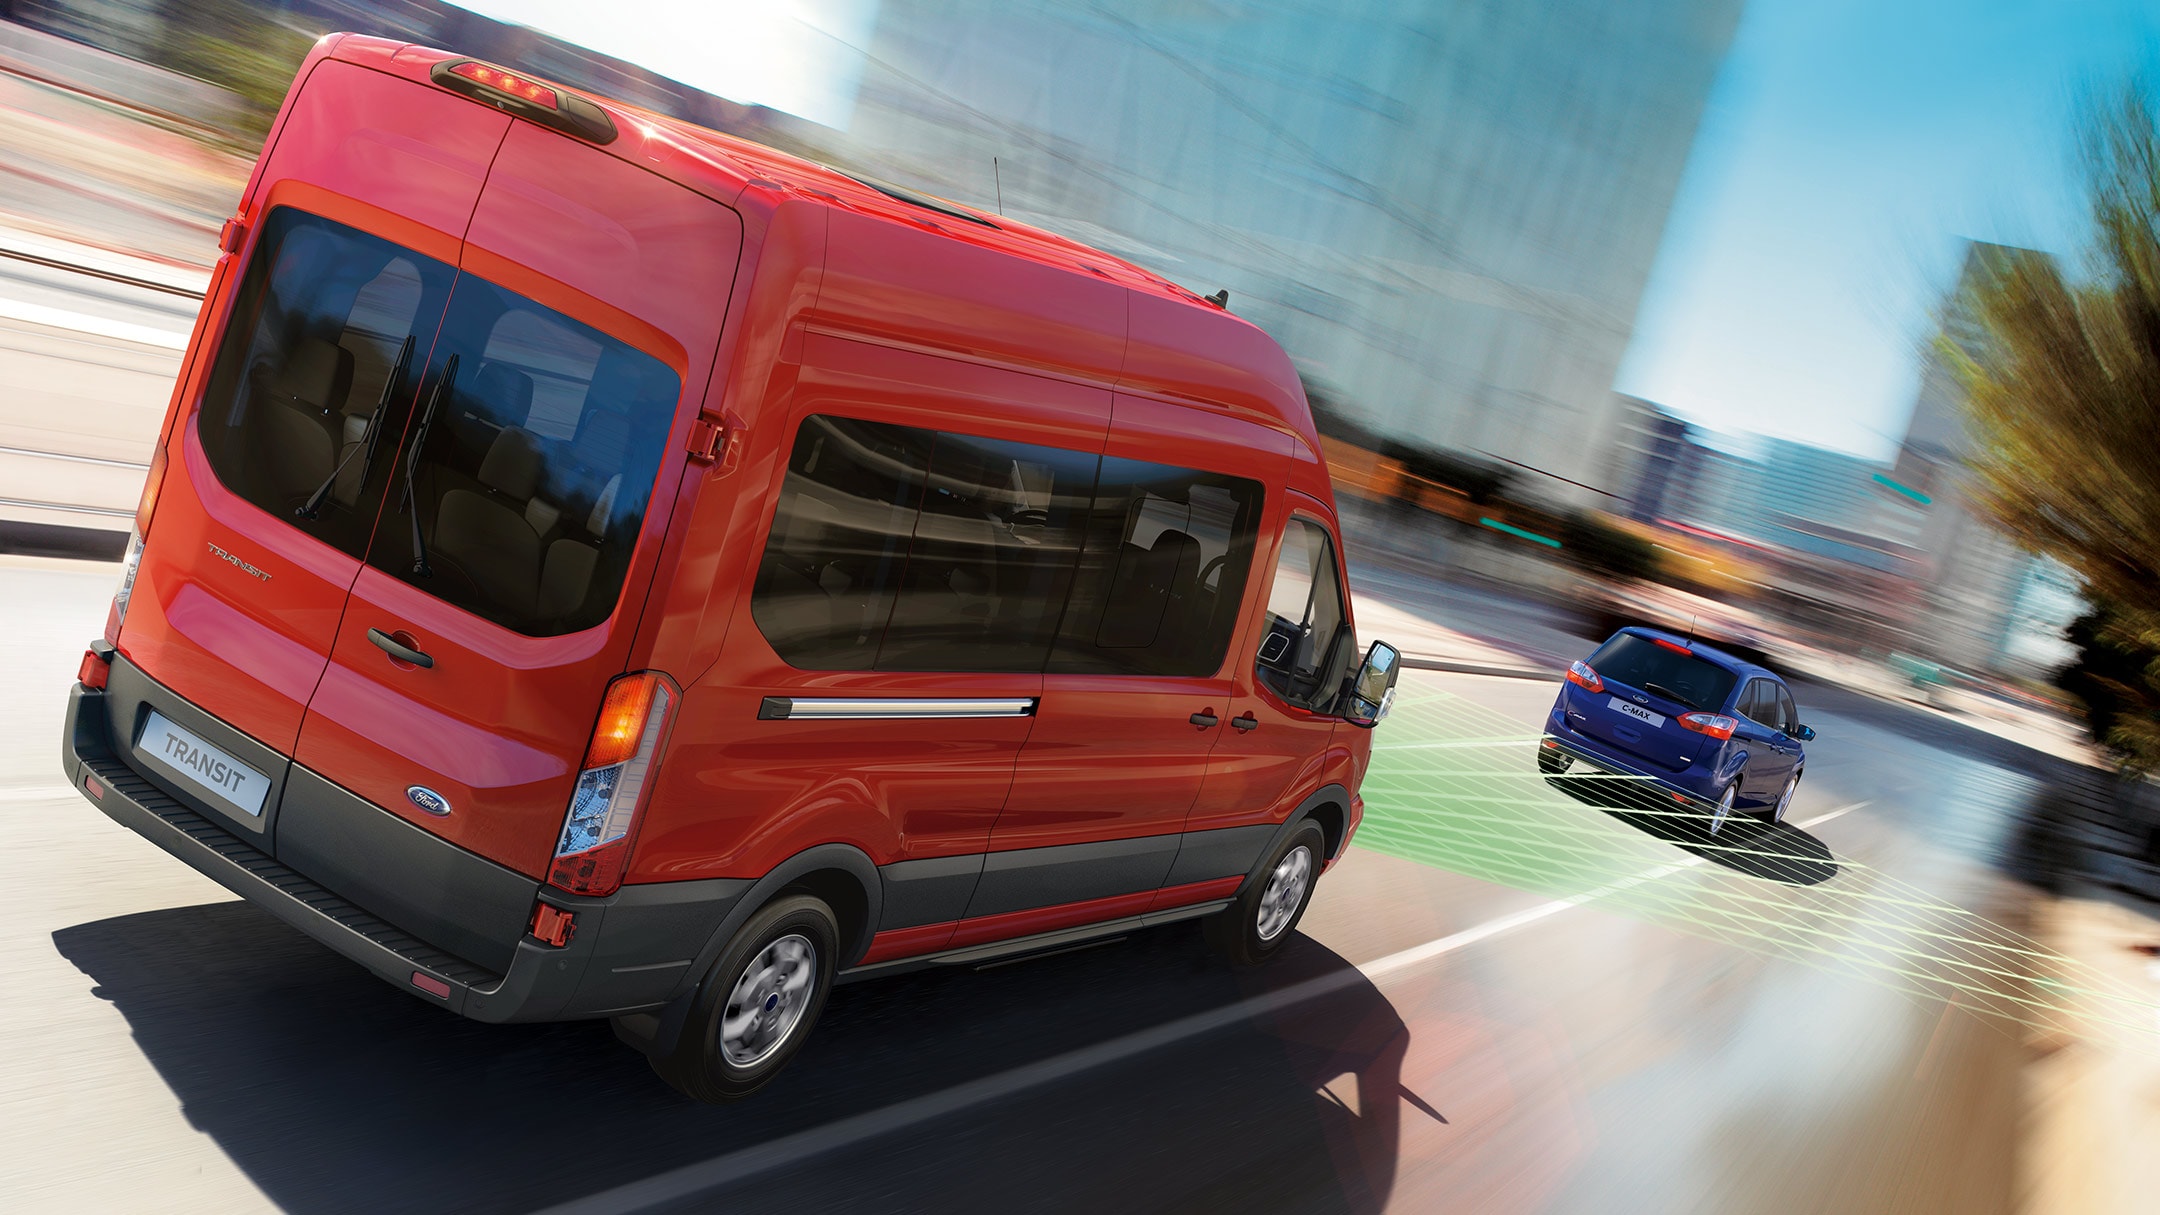 Ford Transit Minibus trailing another car with Adaptive Cruise Control